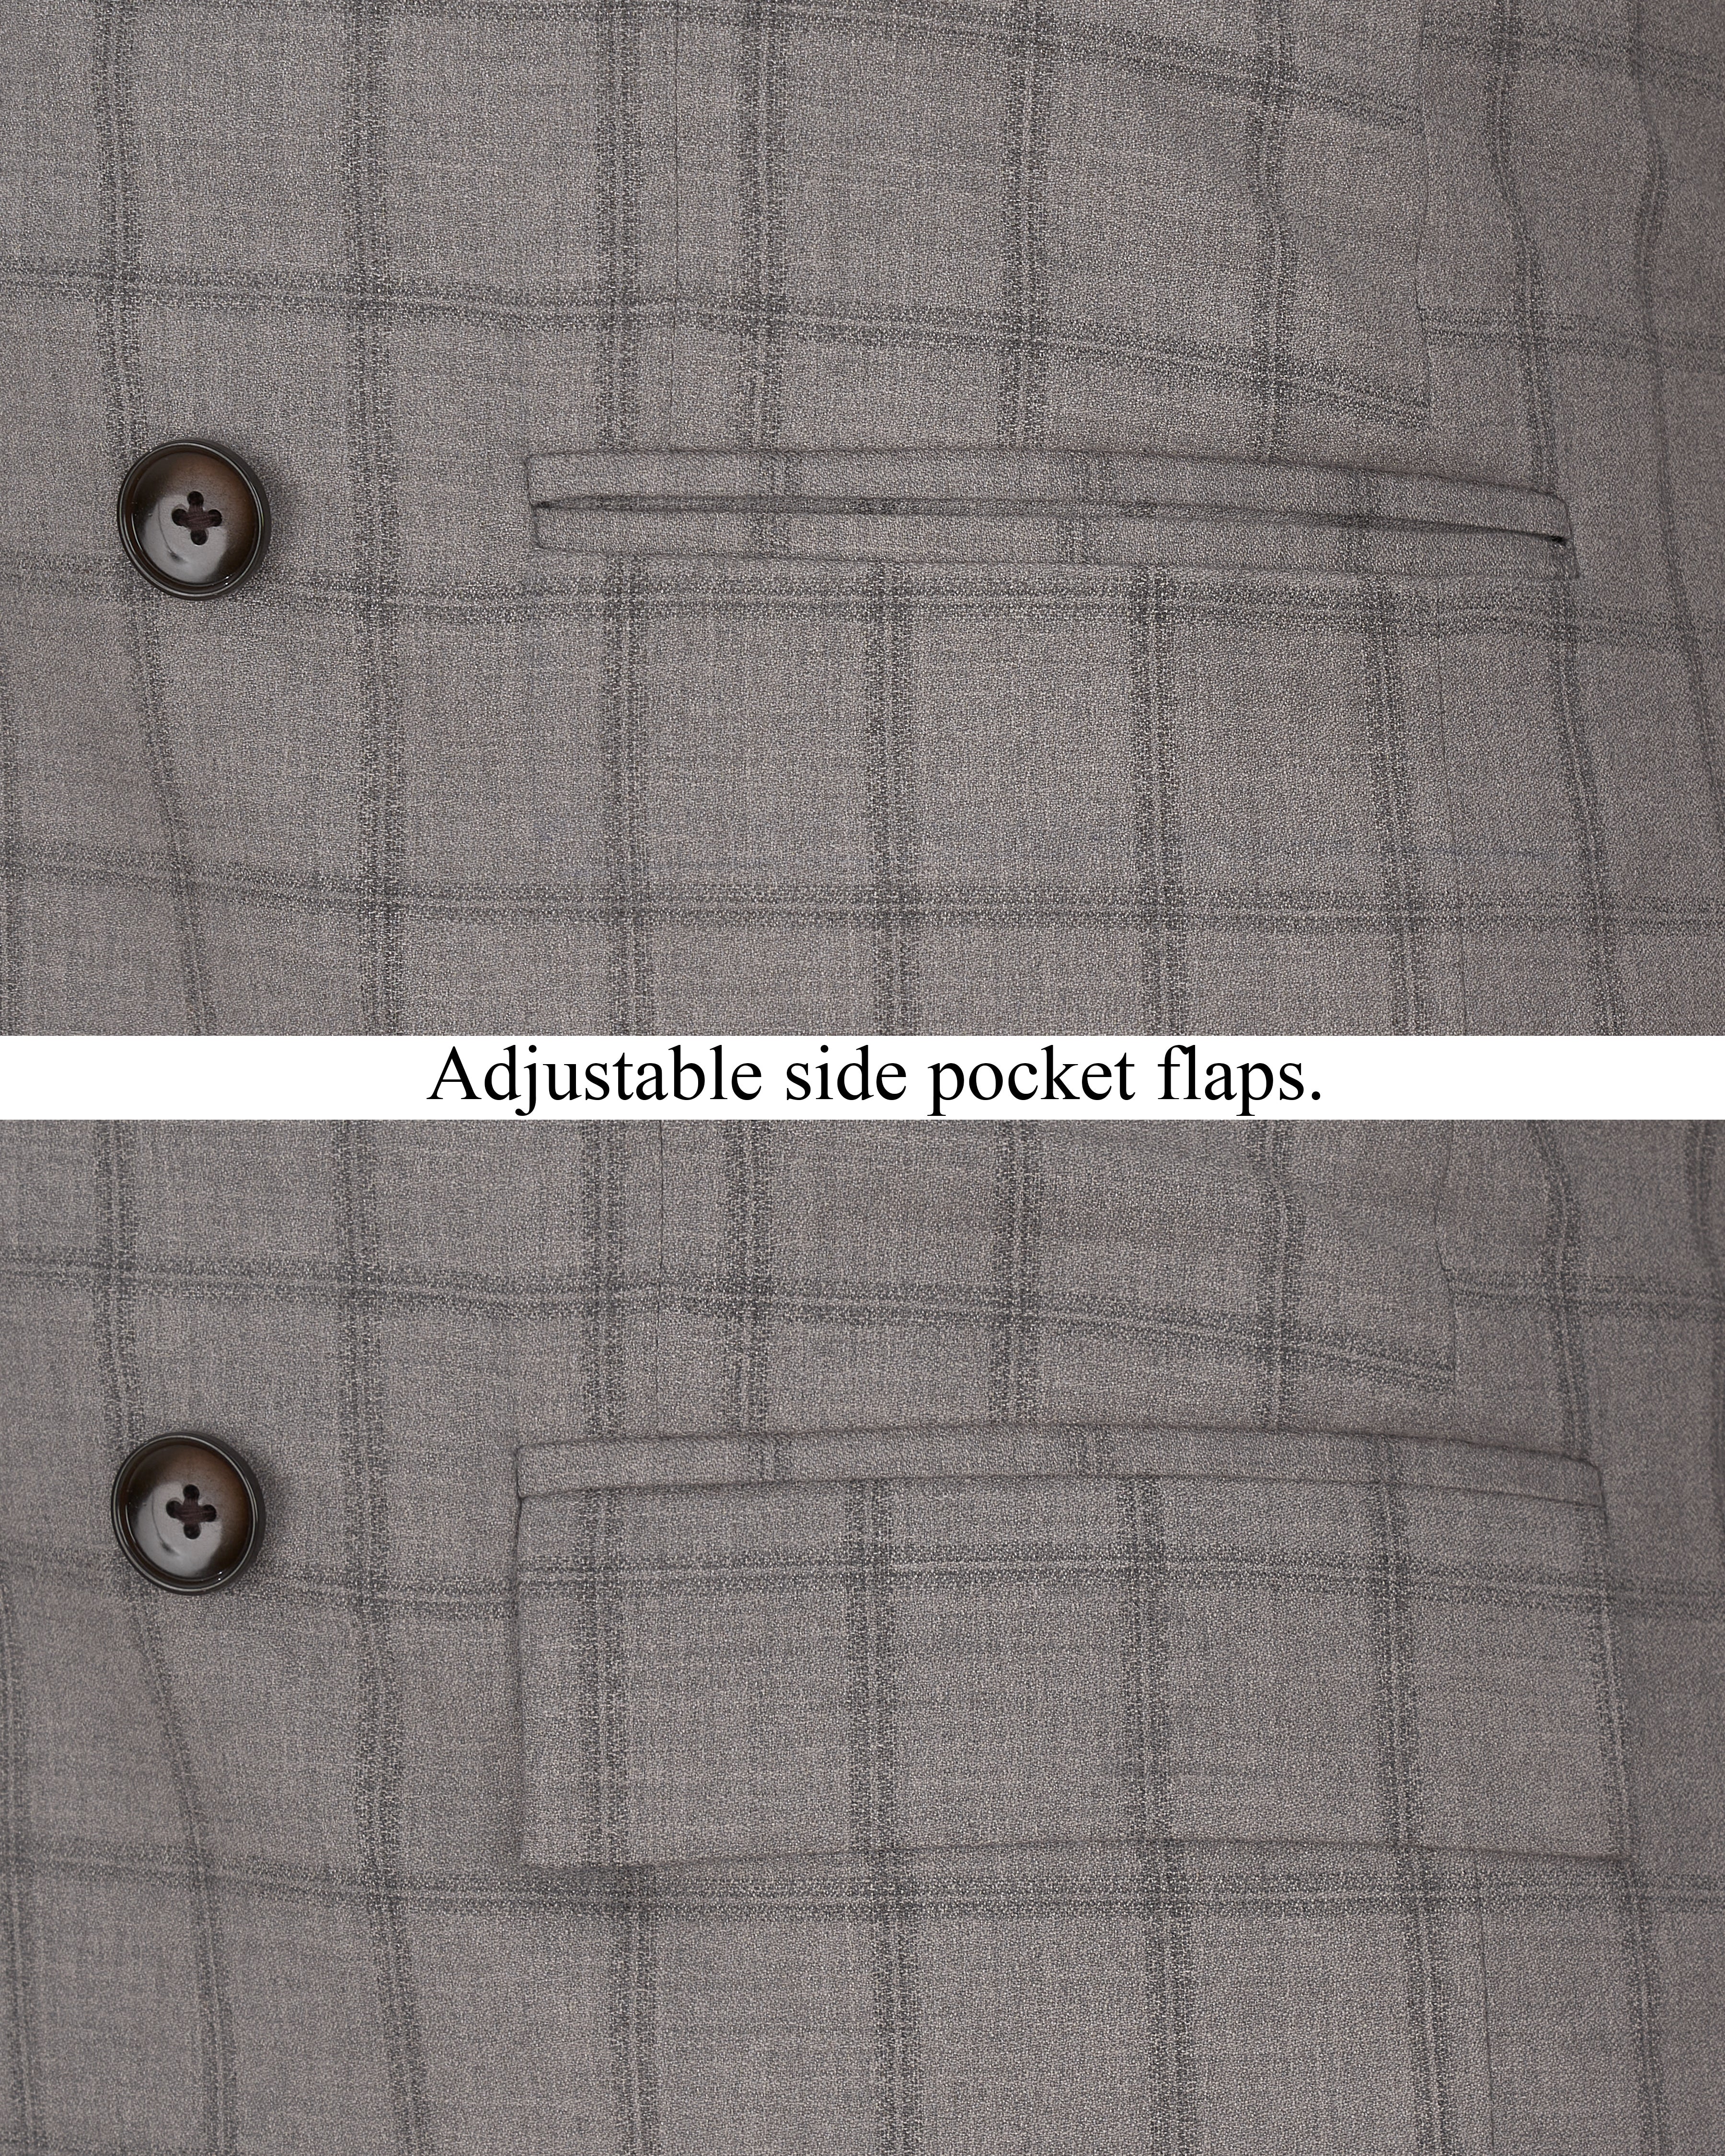 Concord Gray Plaid Double Breasted Suit ST2344-DB-36, ST2344-DB-38, ST2344-DB-40, ST2344-DB-42, ST2344-DB-44, ST2344-DB-46, ST2344-DB-48, ST2344-DB-50, ST2344-DB-52, ST2344-DB-54, ST2344-DB-56, ST2344-DB-58, ST2344-DB-60